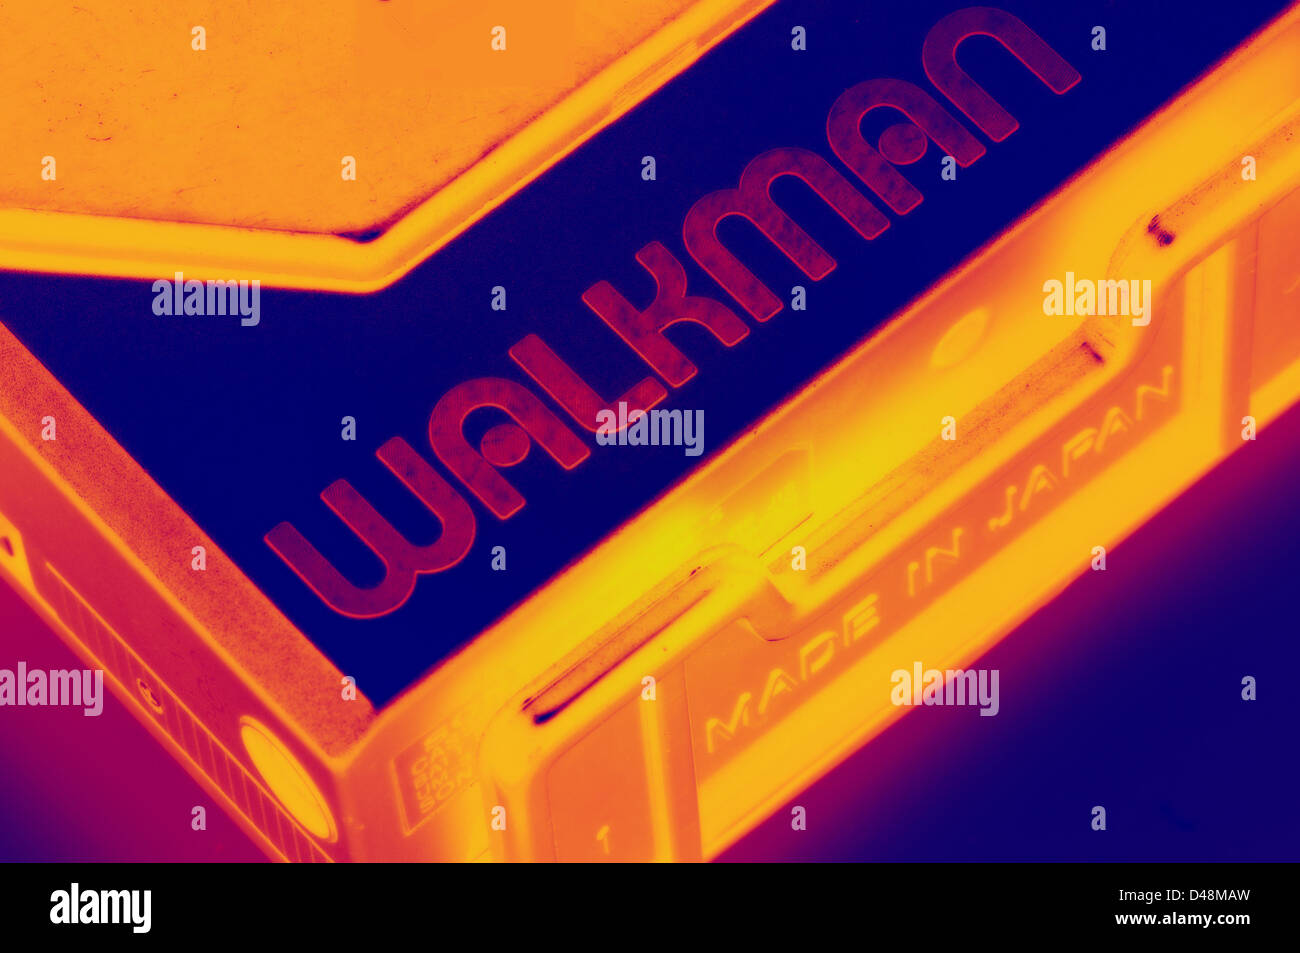 Sony Walkman cassette player thermal imaging filtered Stock Photo